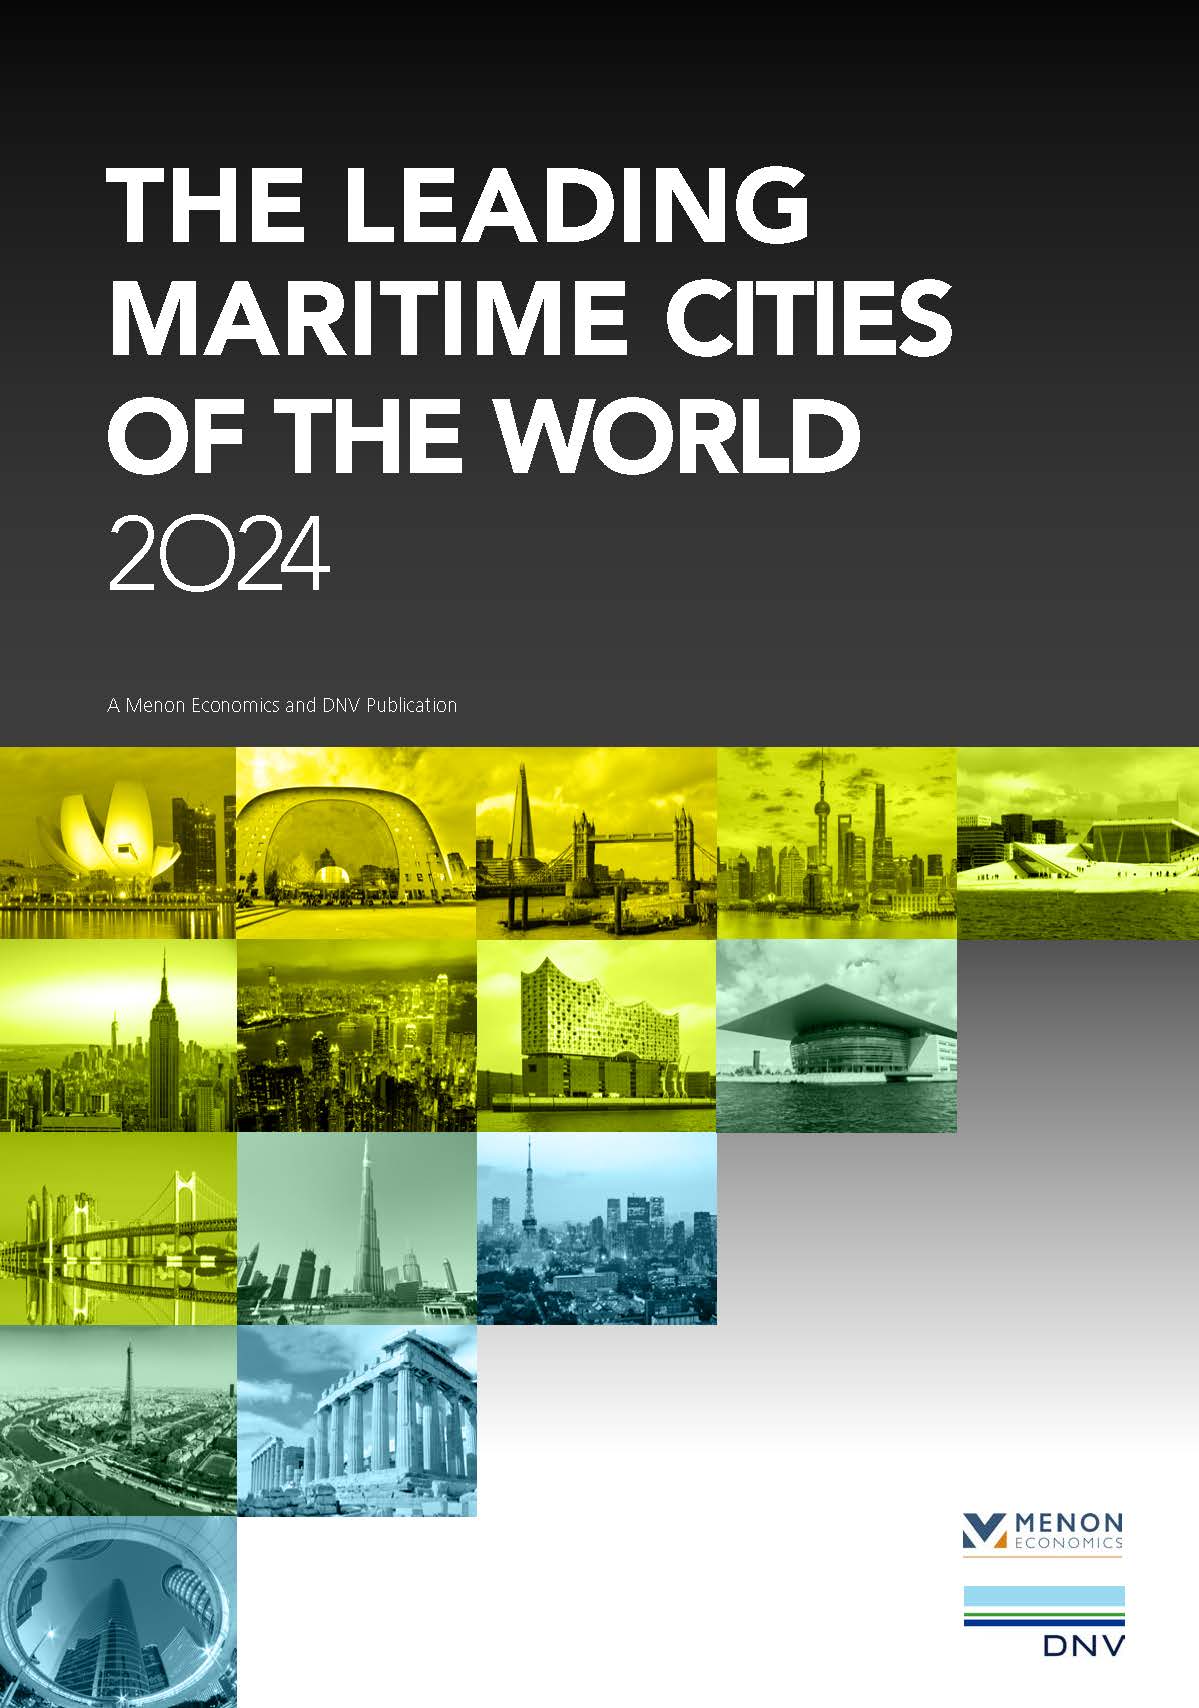 Leading Maritime Cities Report 2024: Amid a sea of 